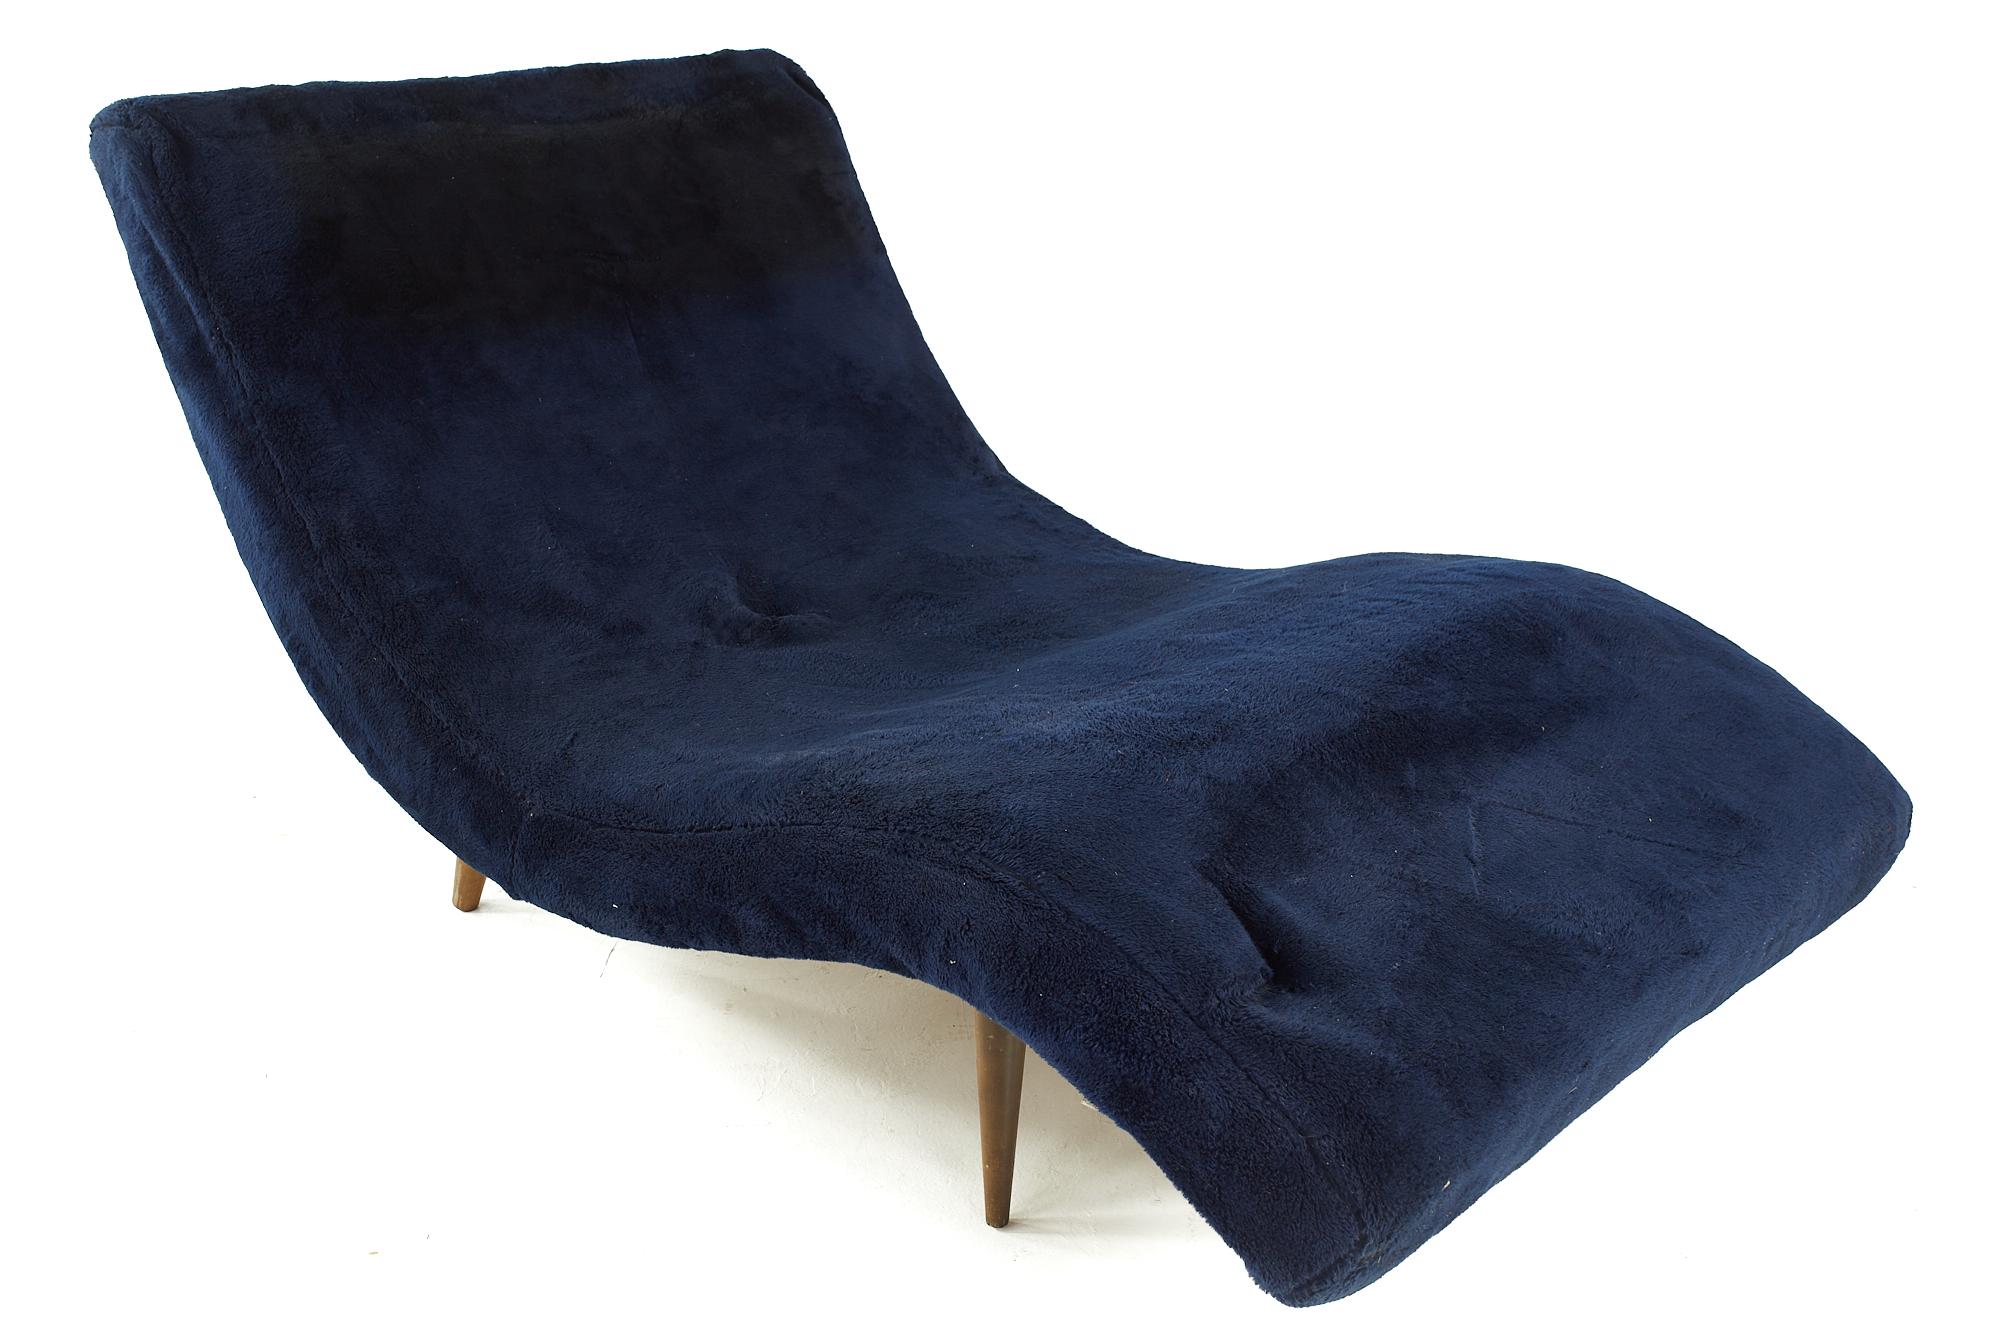 Upholstery Adrian Pearsall for Craft Associates Midcentury Wave Chaise For Sale